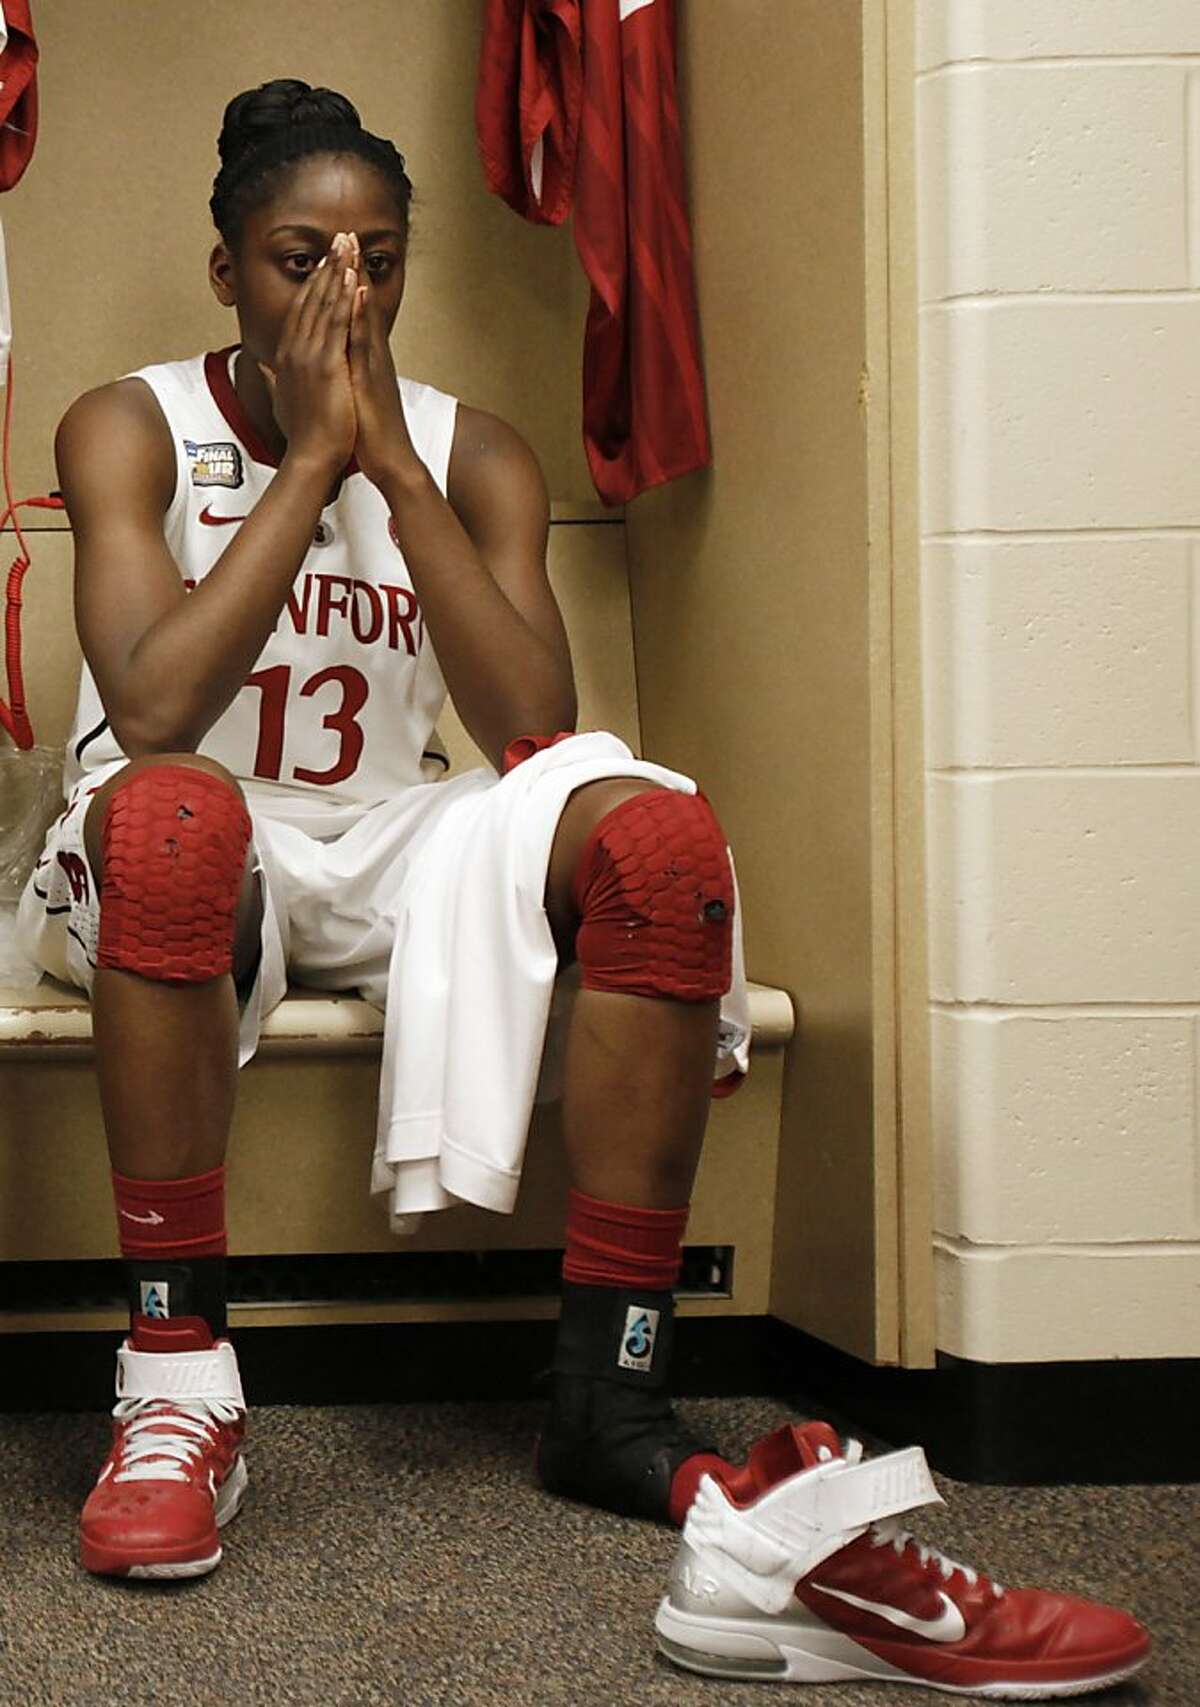 Stanford's Chiney Ogwumike (13) reacts in the locker room after Stanford's 63-62 loss to Texas A&M in a women's NCAA Final Four semifinal college basketball game in Indianapolis, Sunday, April 3, 2011.